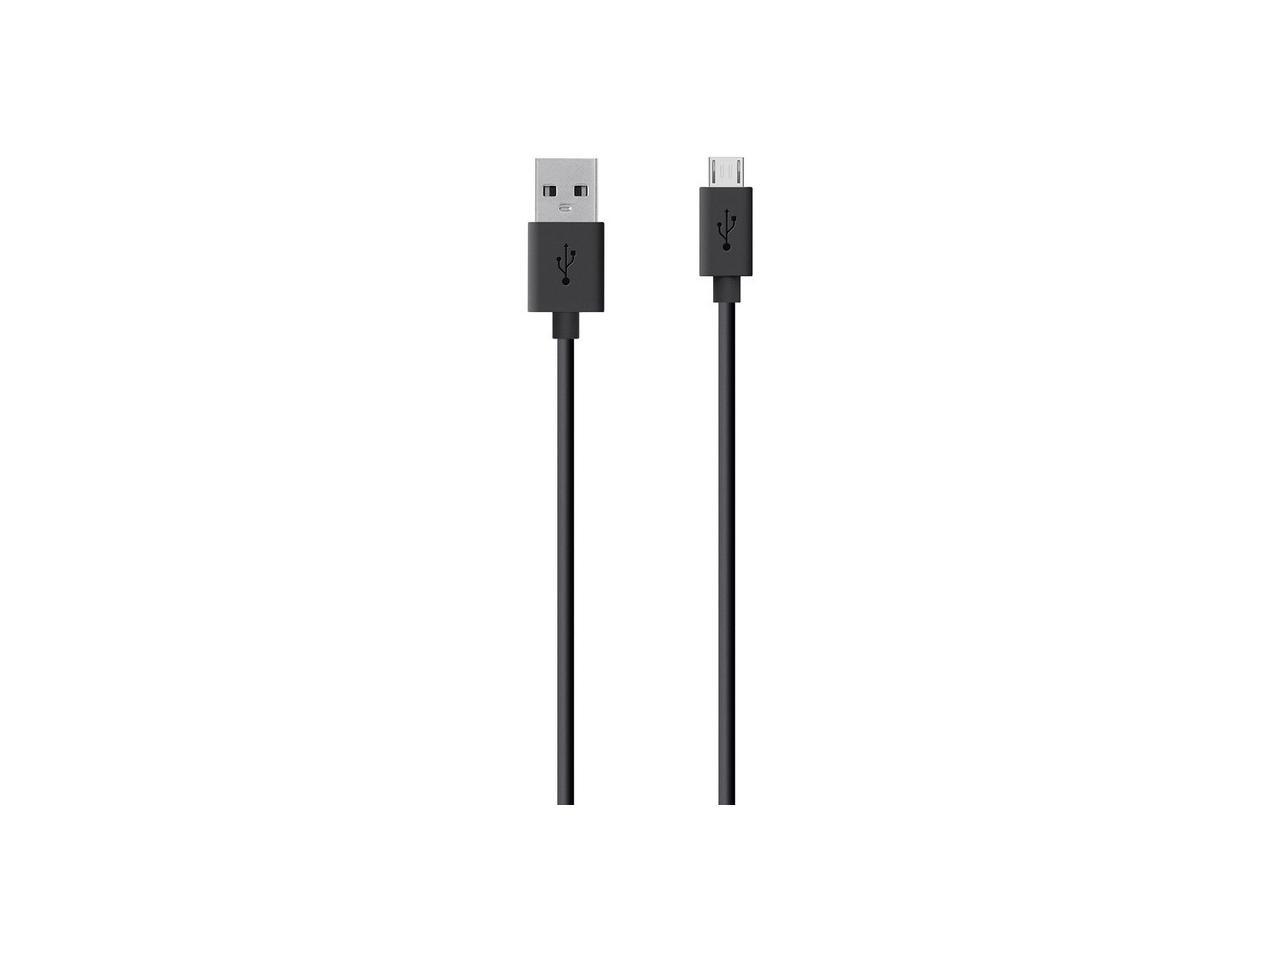 Belkin MIXIT? Micro USB ChargeSync Cable F2CU012bt3M-BLK - image 3 of 11